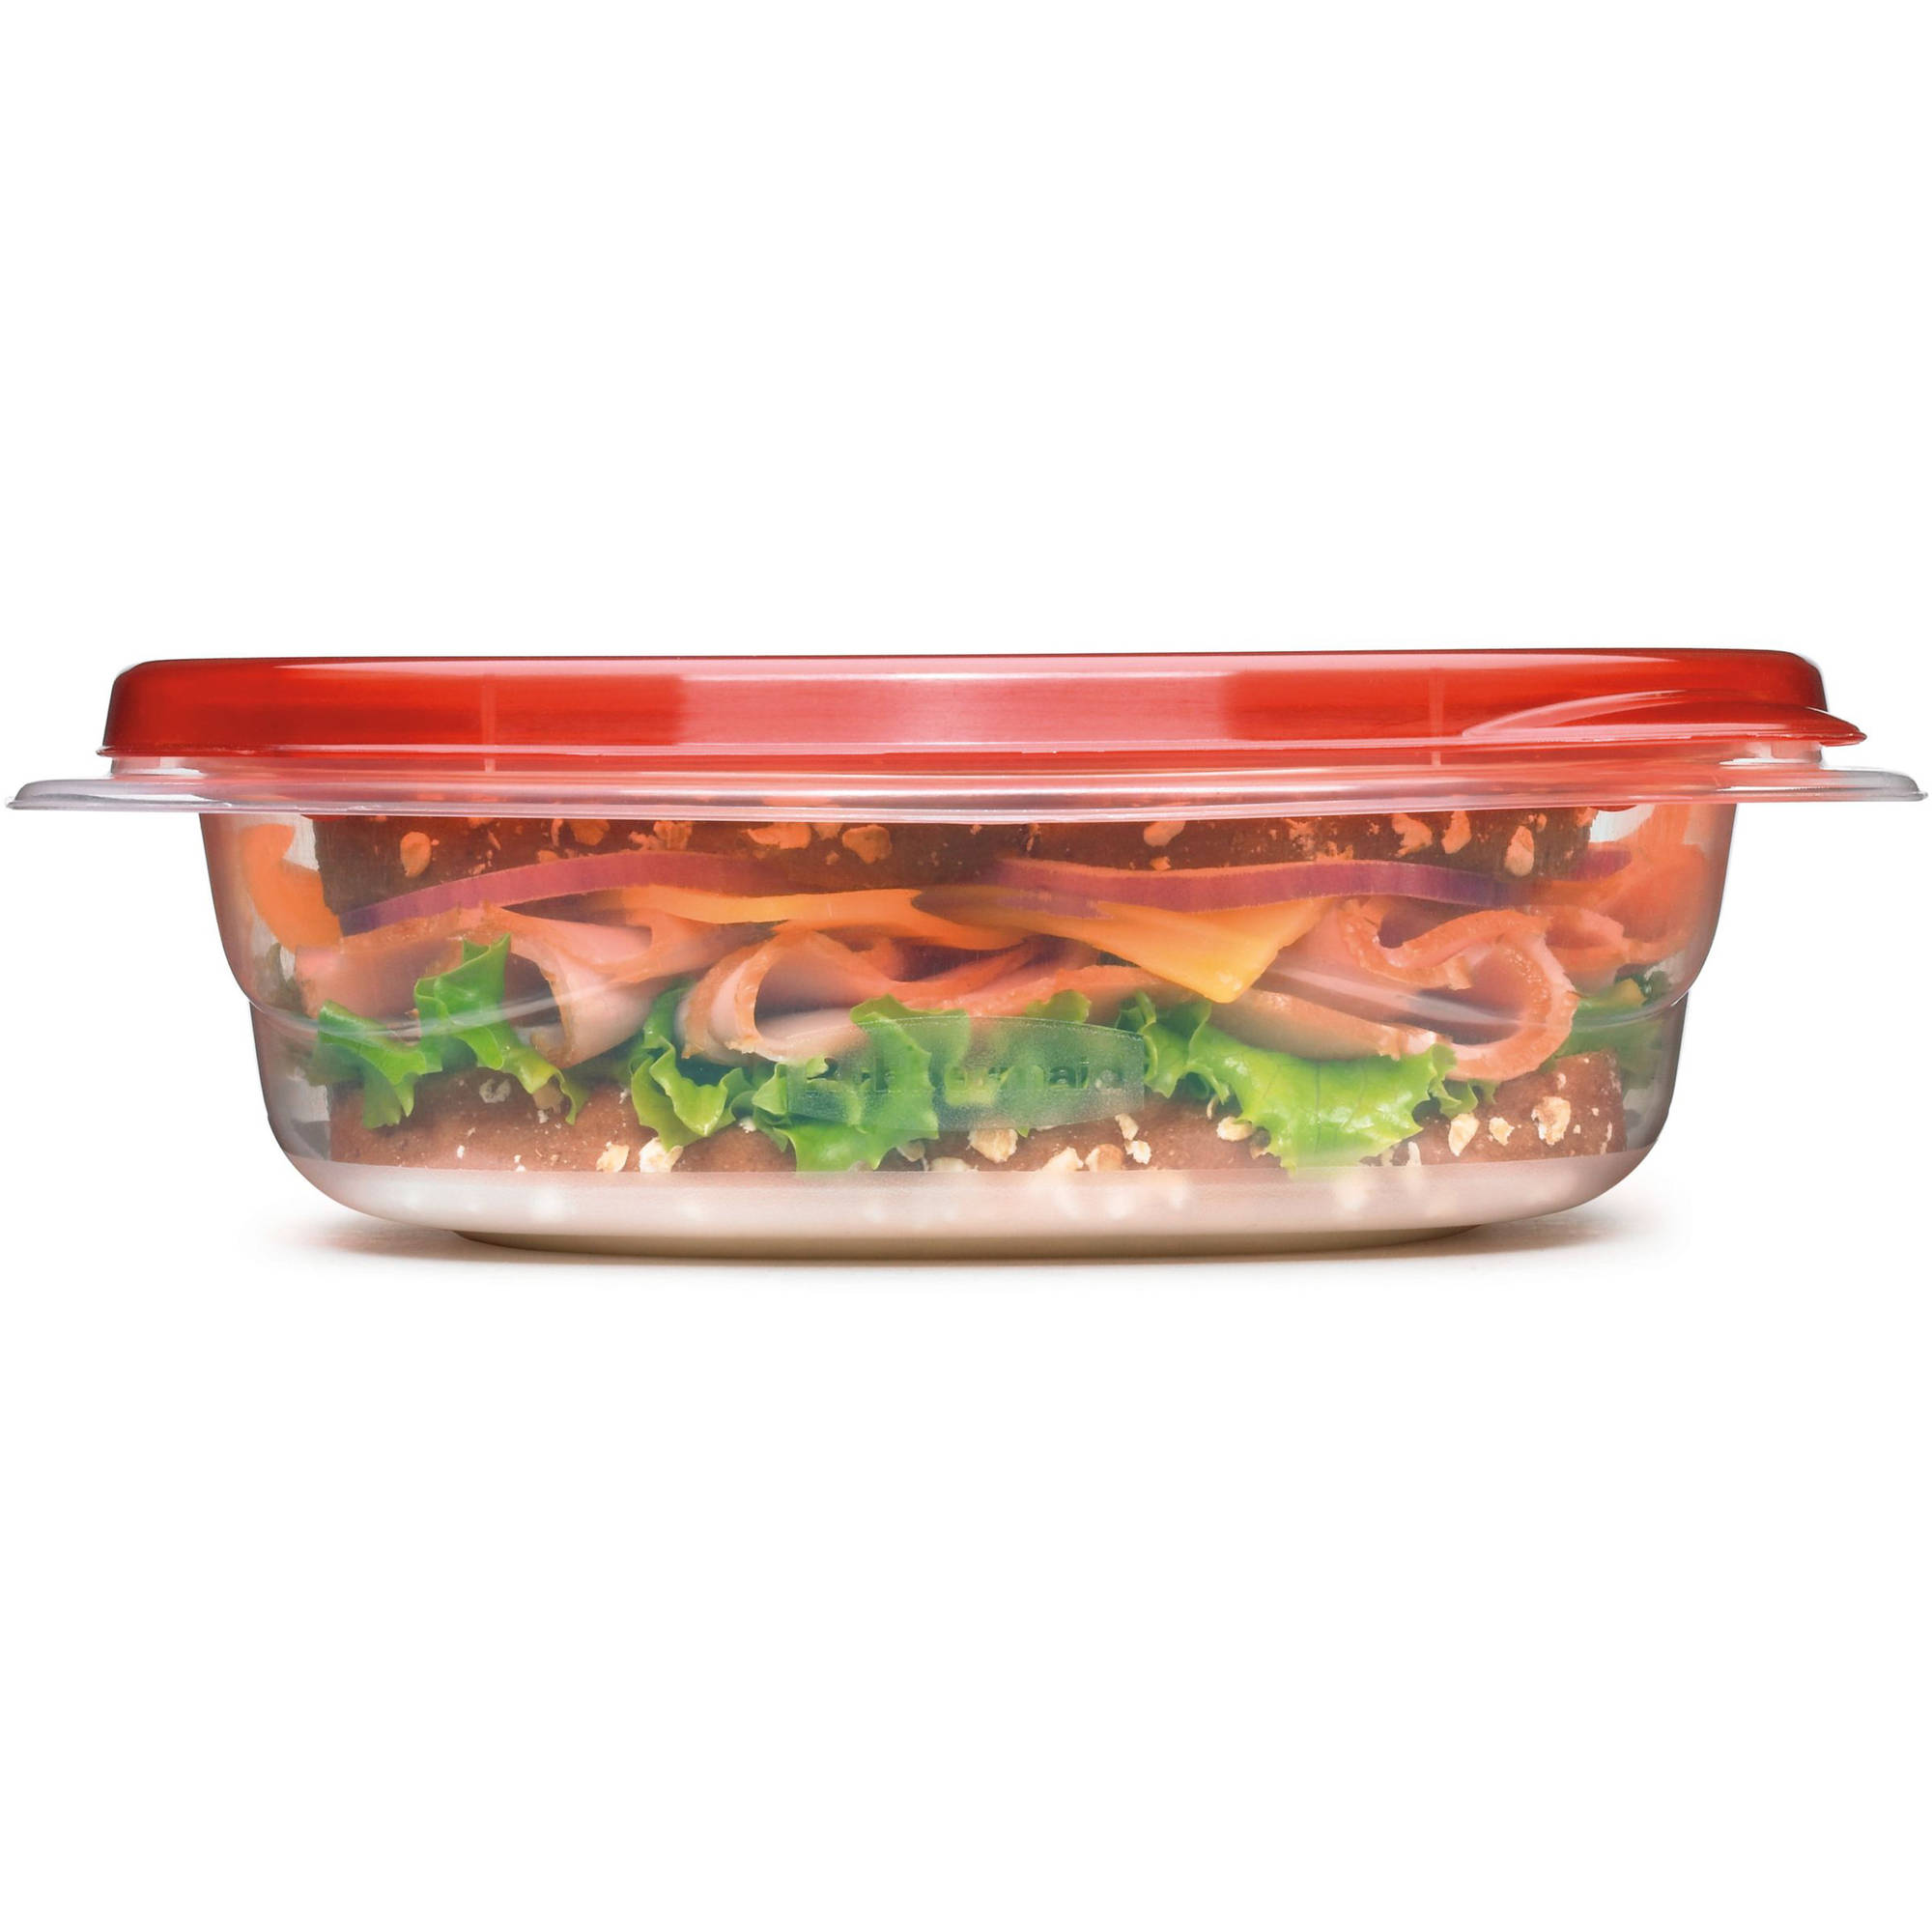 Rubbermaid TakeAlongs Food Storage Container, 36-Piece Set, Red - image 3 of 8